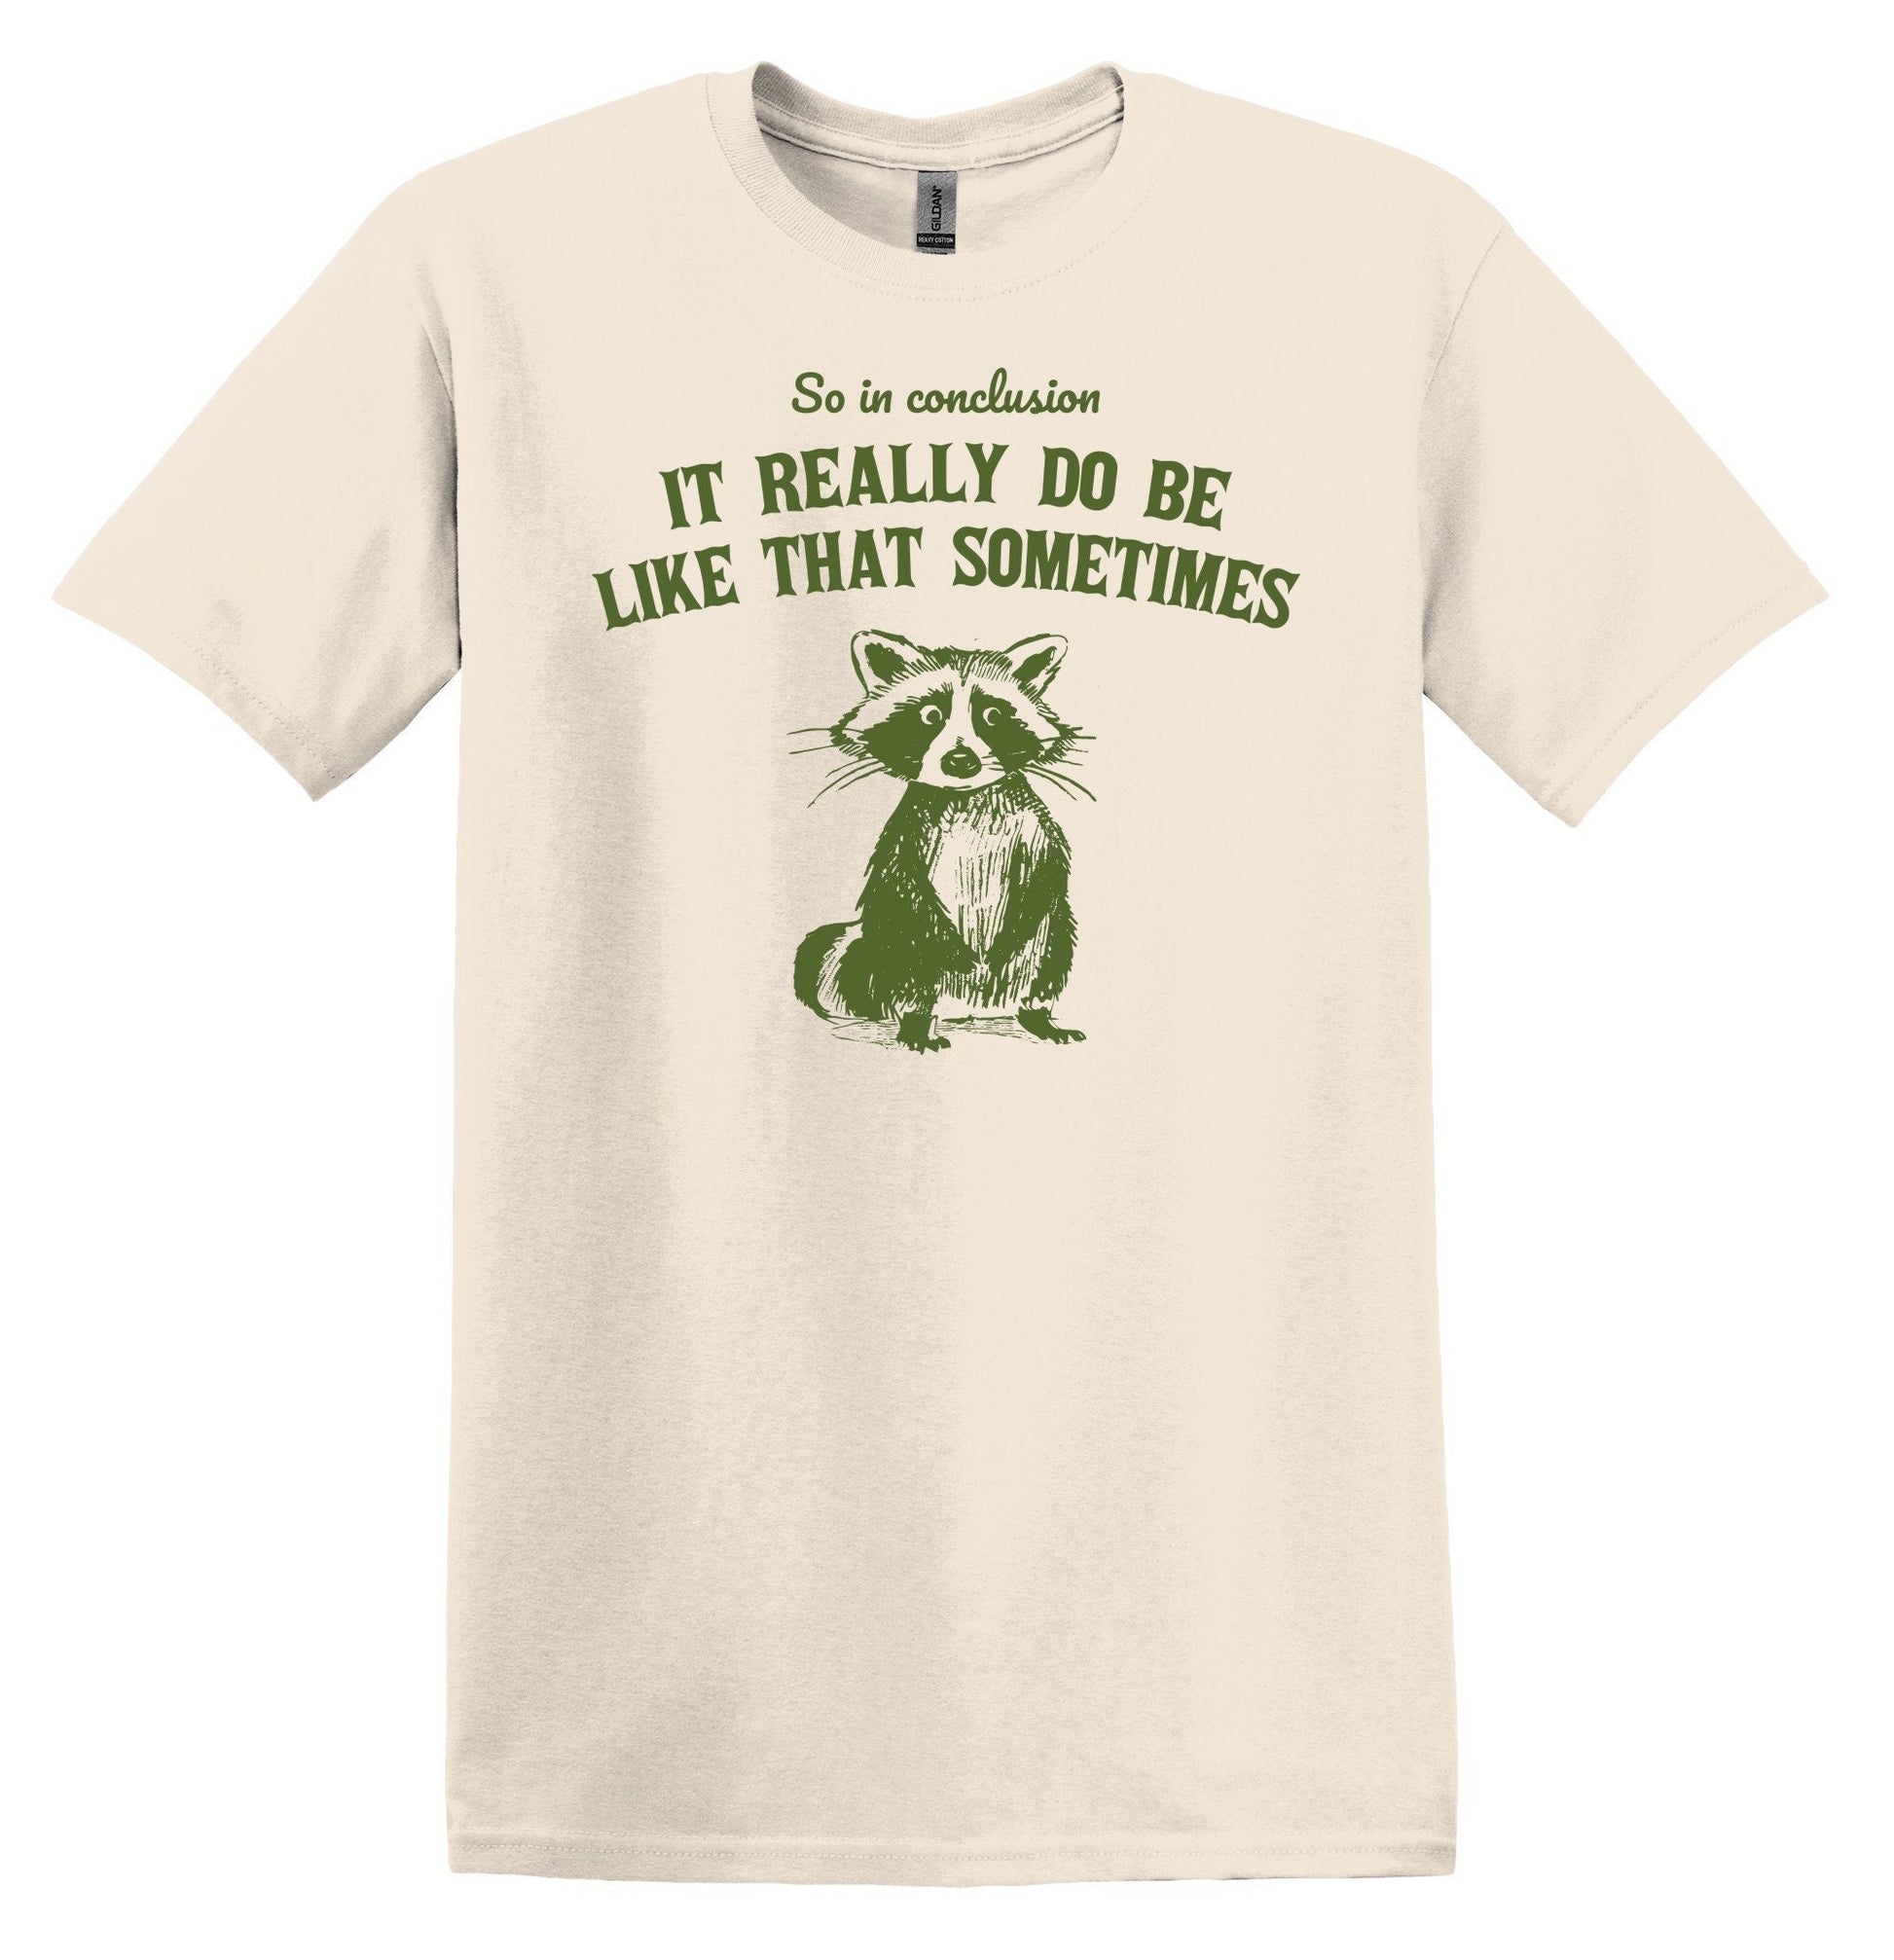 It really do be Like that Sometimes Raccoon Shirt - Funny Graphic Tee